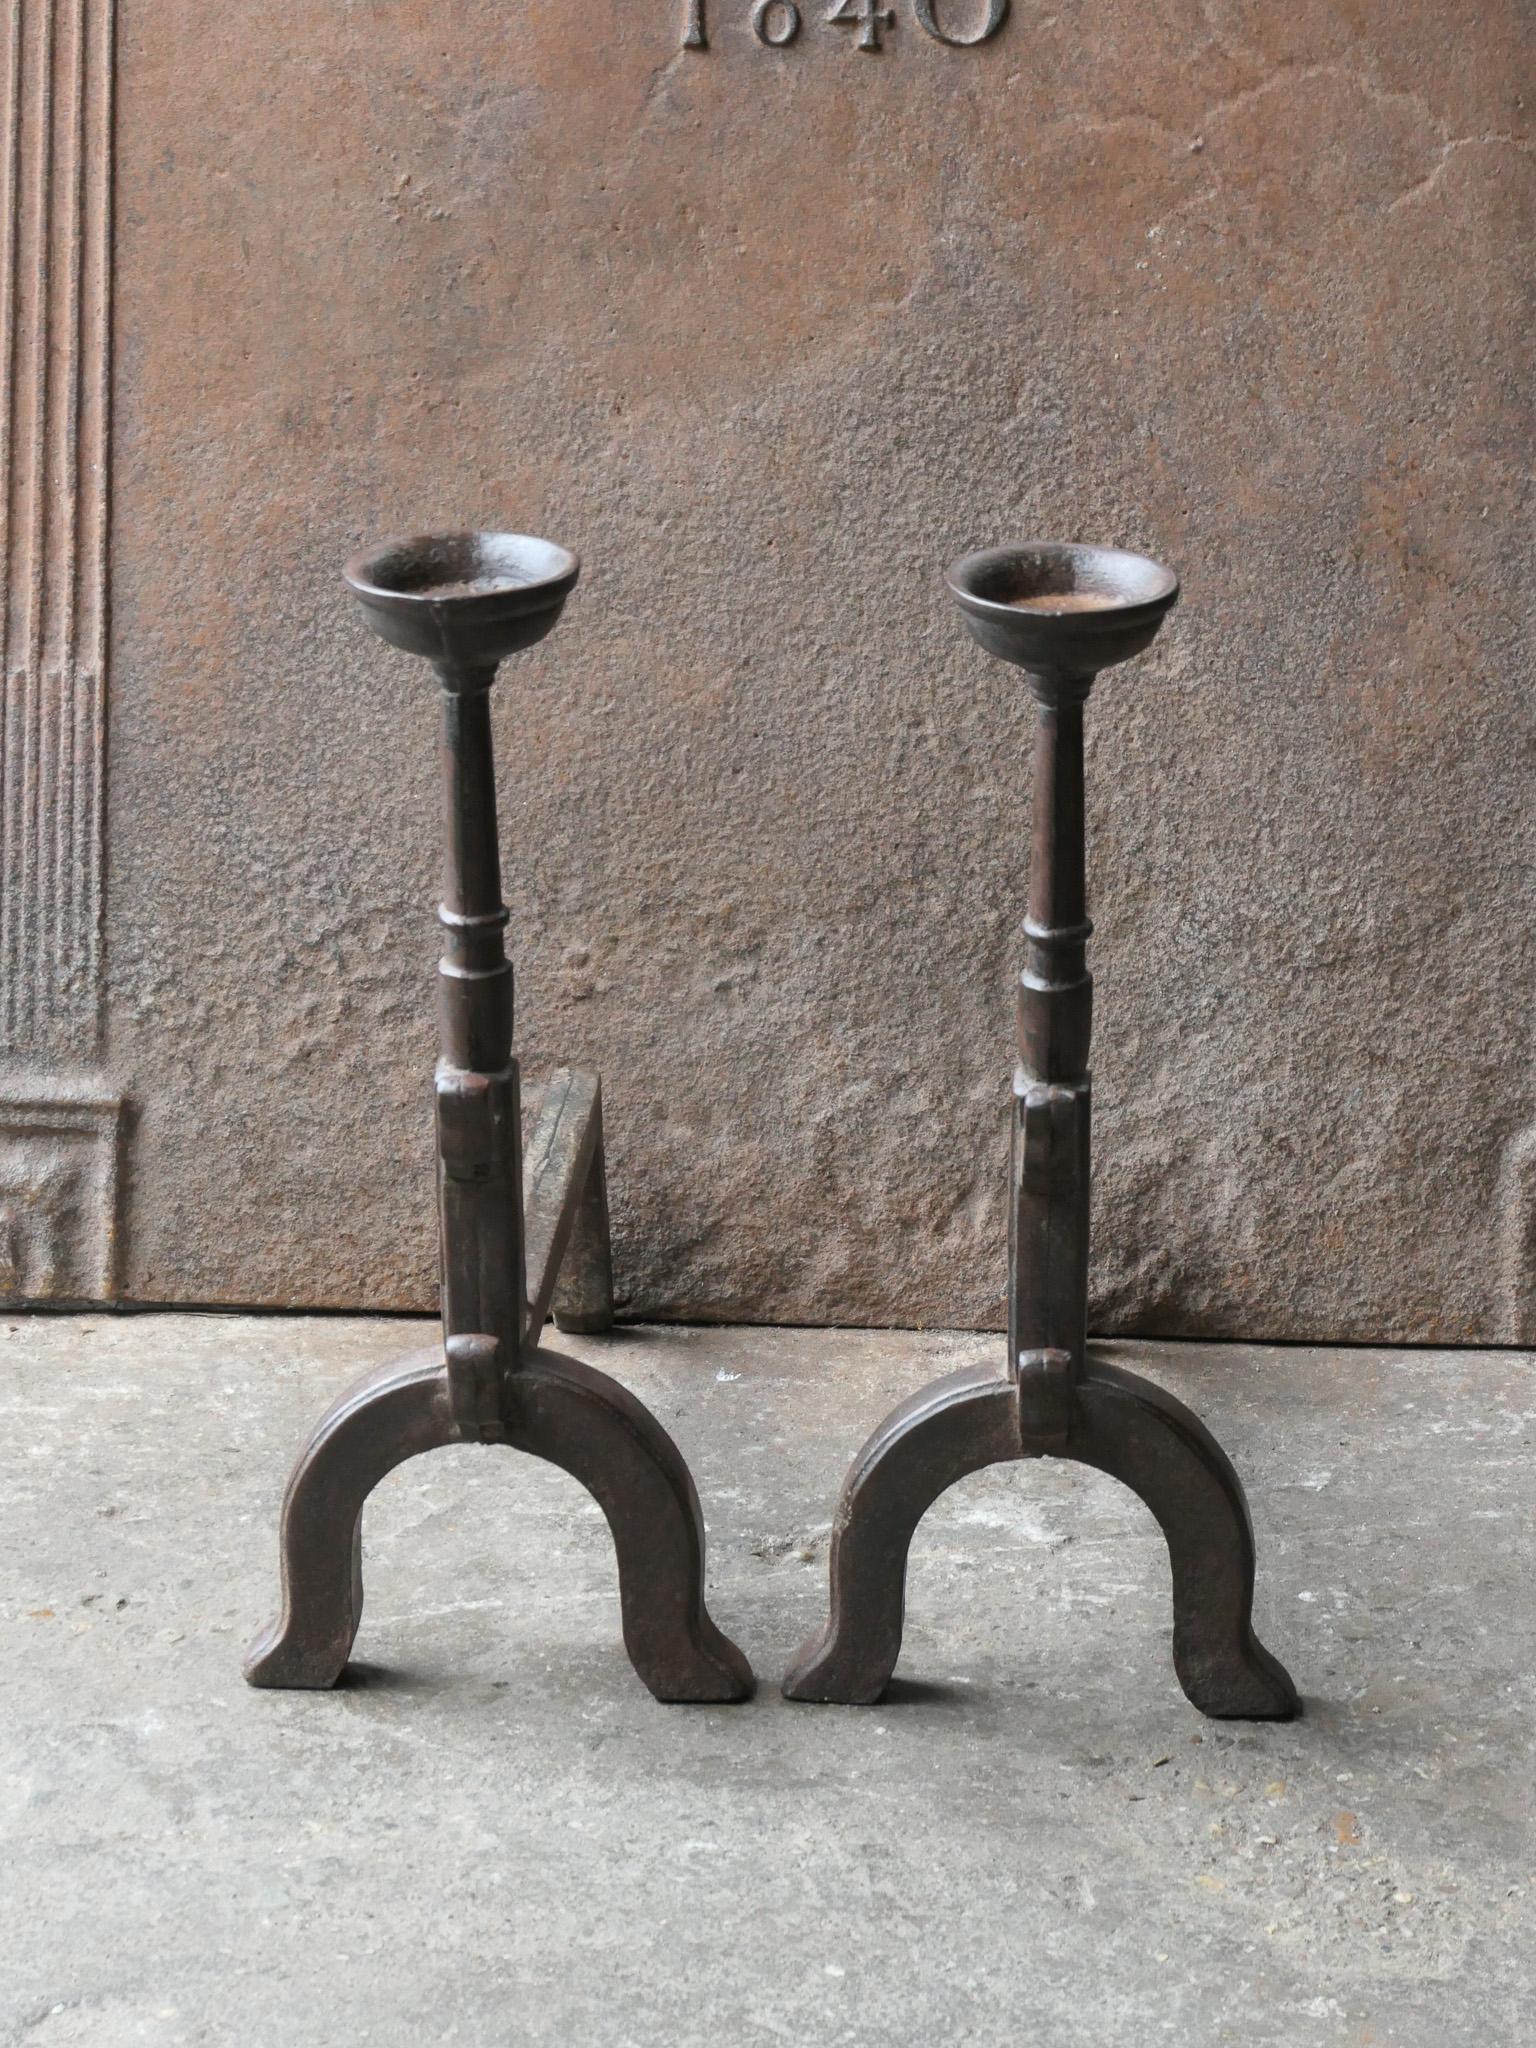 French Gothic style fire dogs made of cast iron. With spit hooks to grill food and a cup to keep drinks or soup warm. This type of andirons are also called cupdogs.

We have a unique and specialized collection of antique and used fireplace